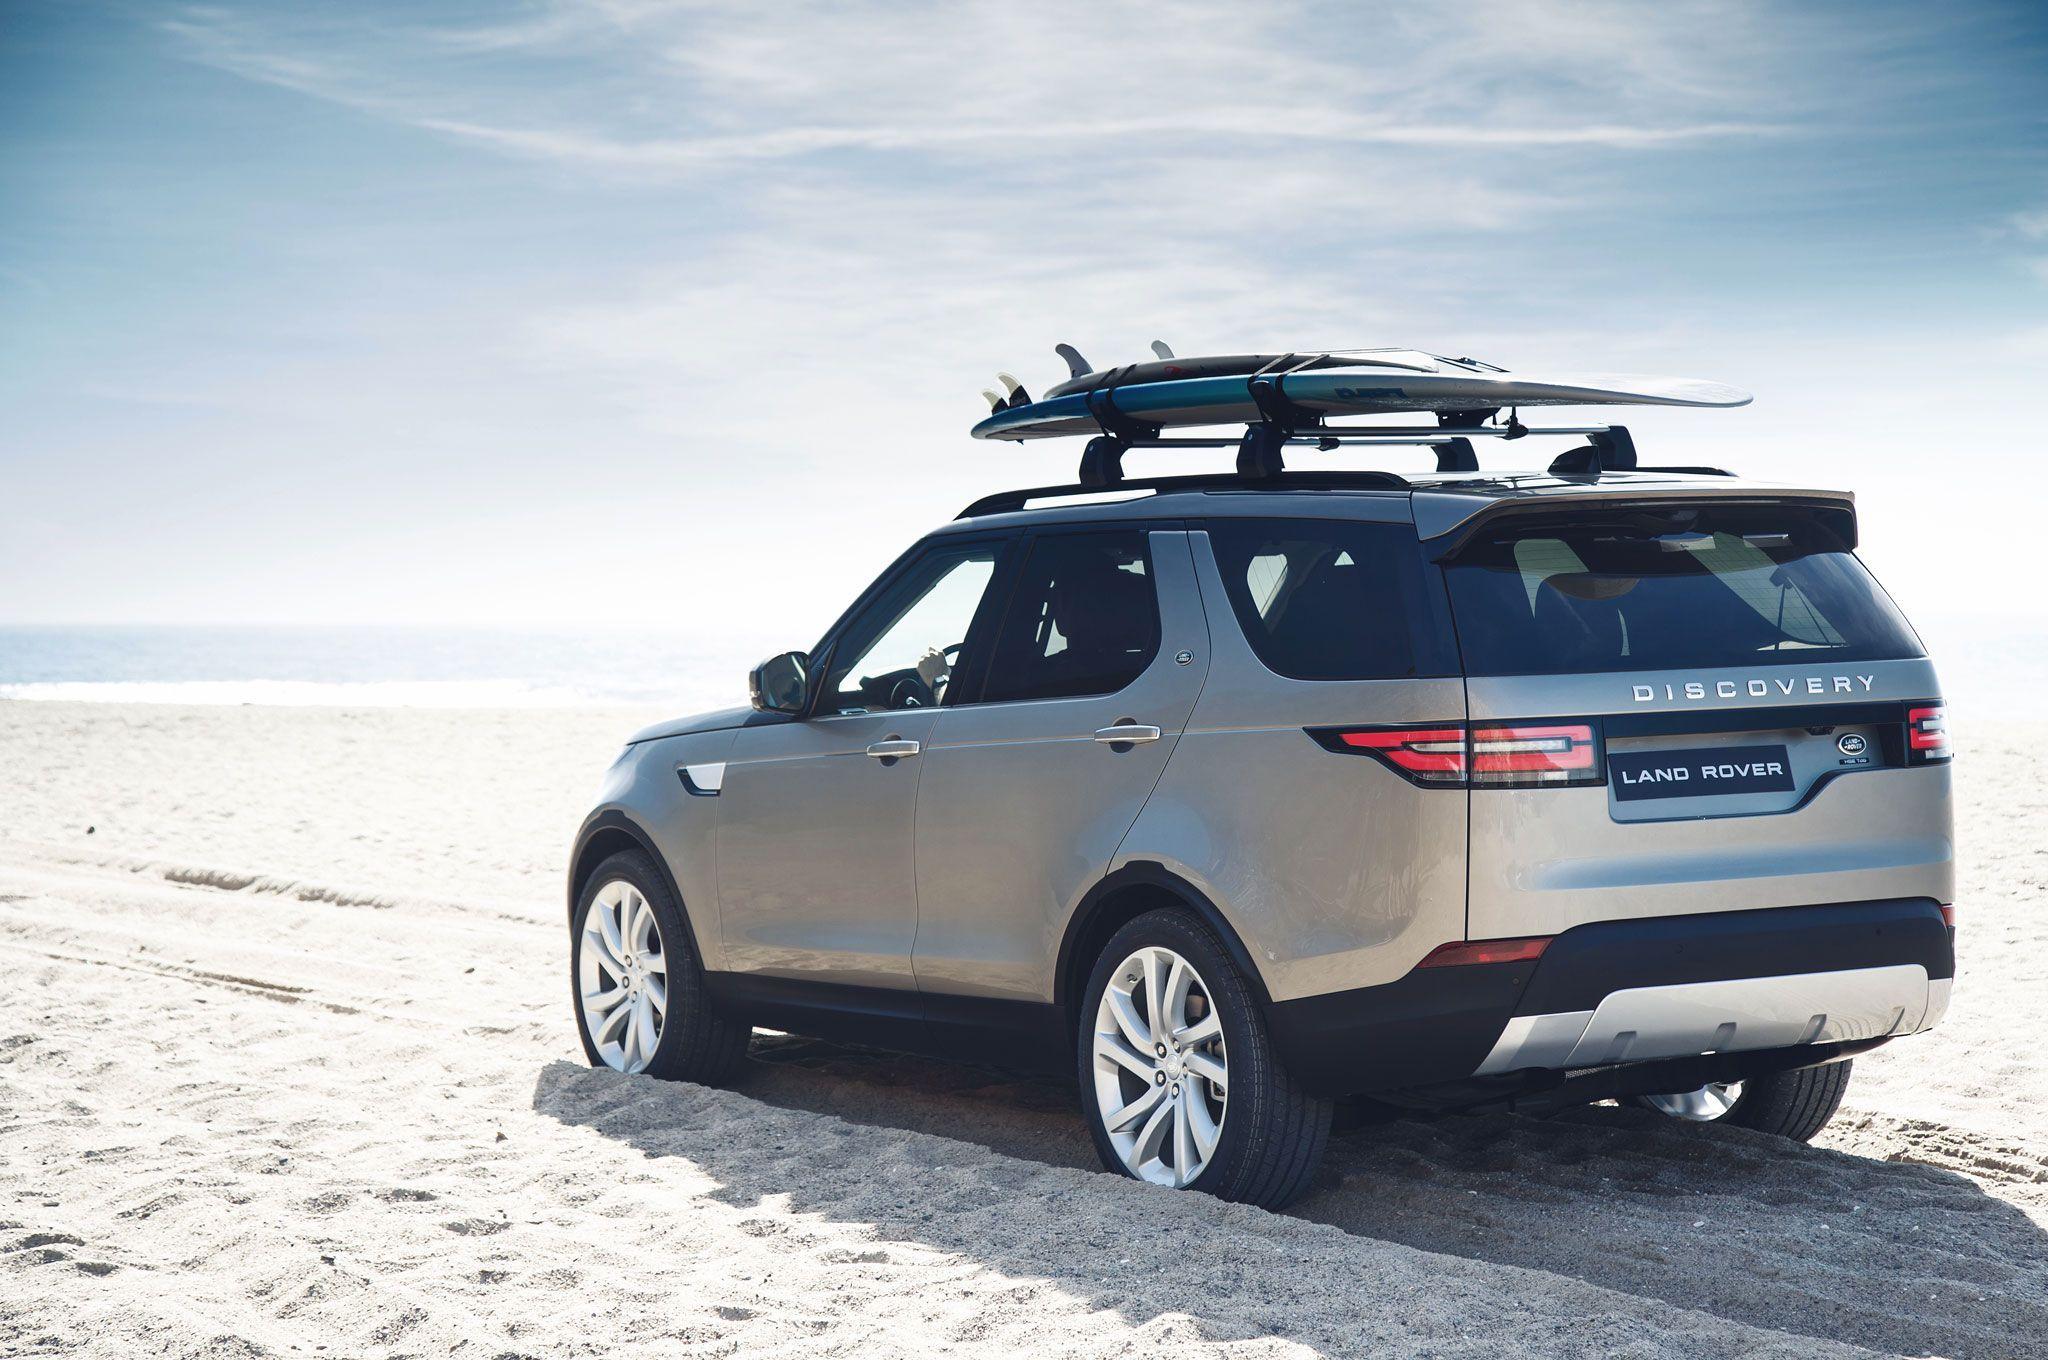 Land Rover Discovery Takes Center Stage at Los Angeles Auto Show